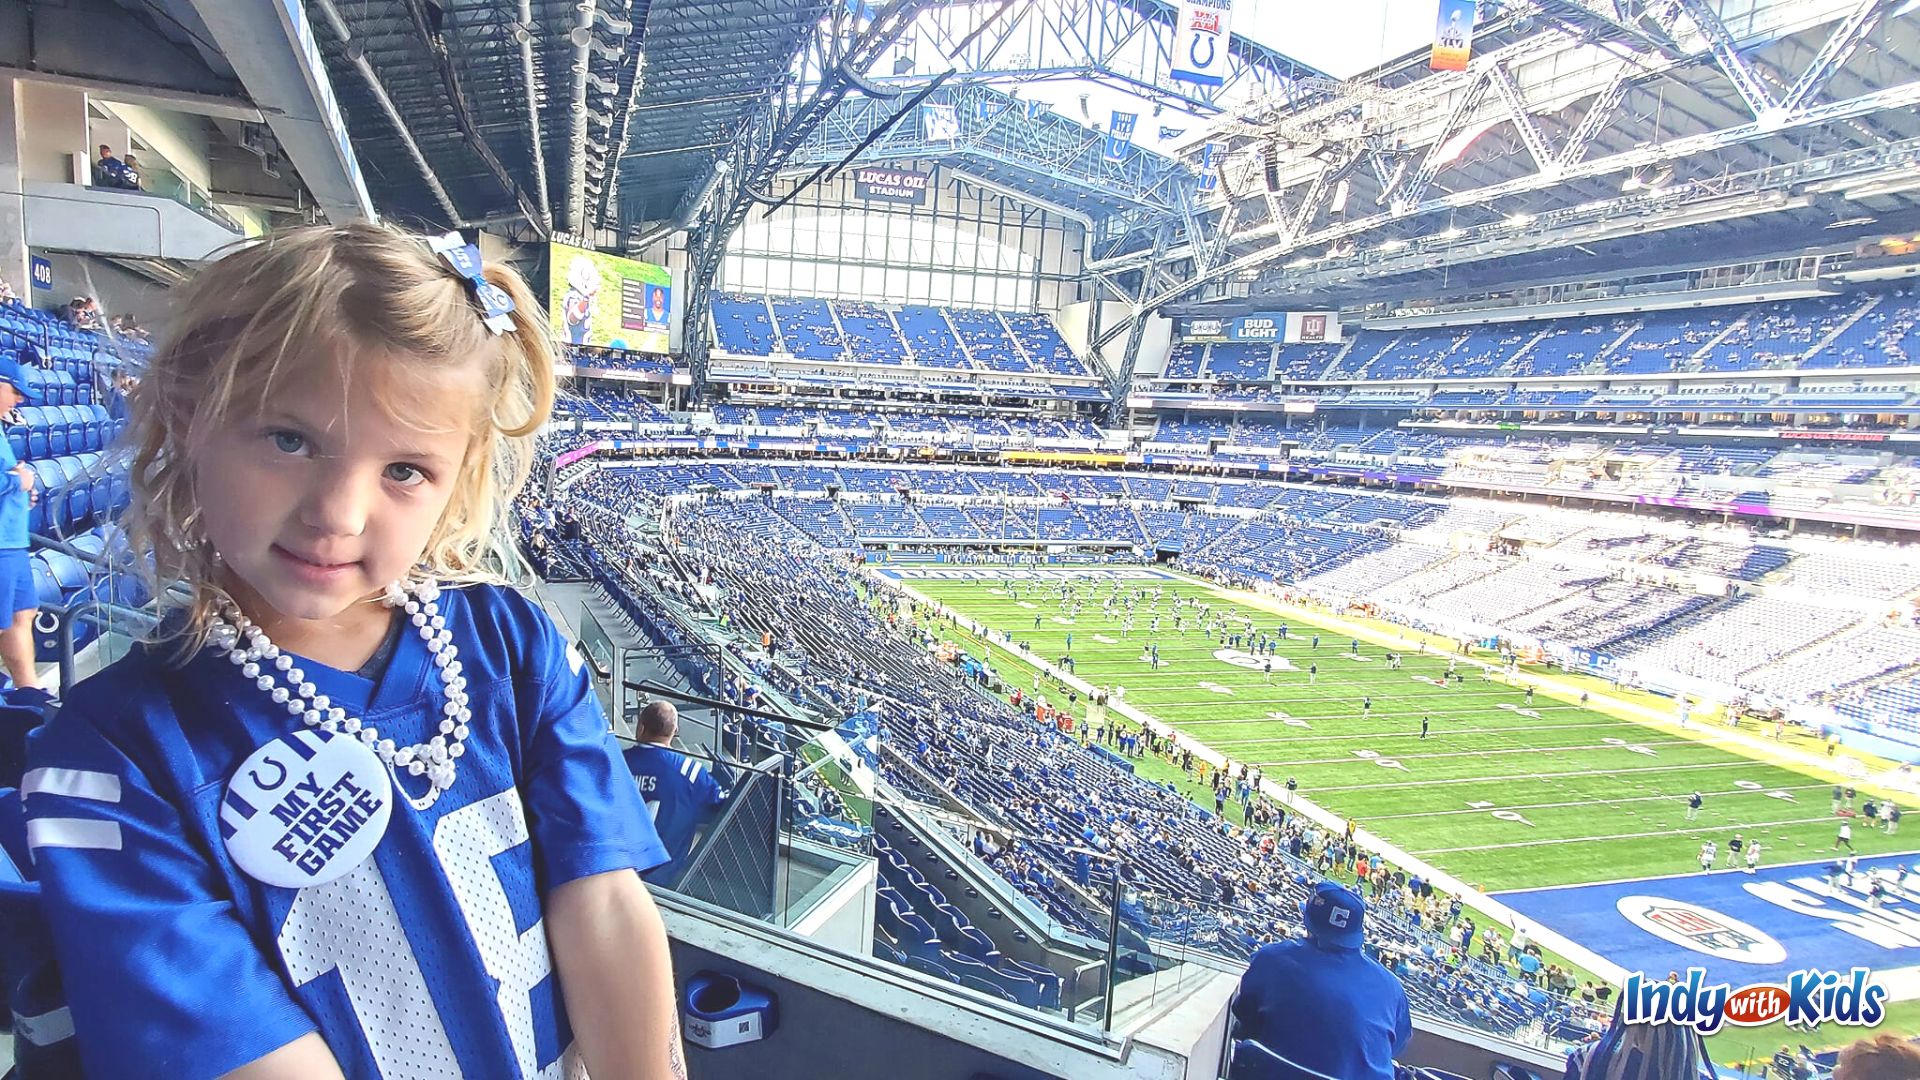 9 Indianapolis Sports Fan Clubs for Kids: Join the Colts' Blue's Club + for ticket discounts and Blue-themed gear.